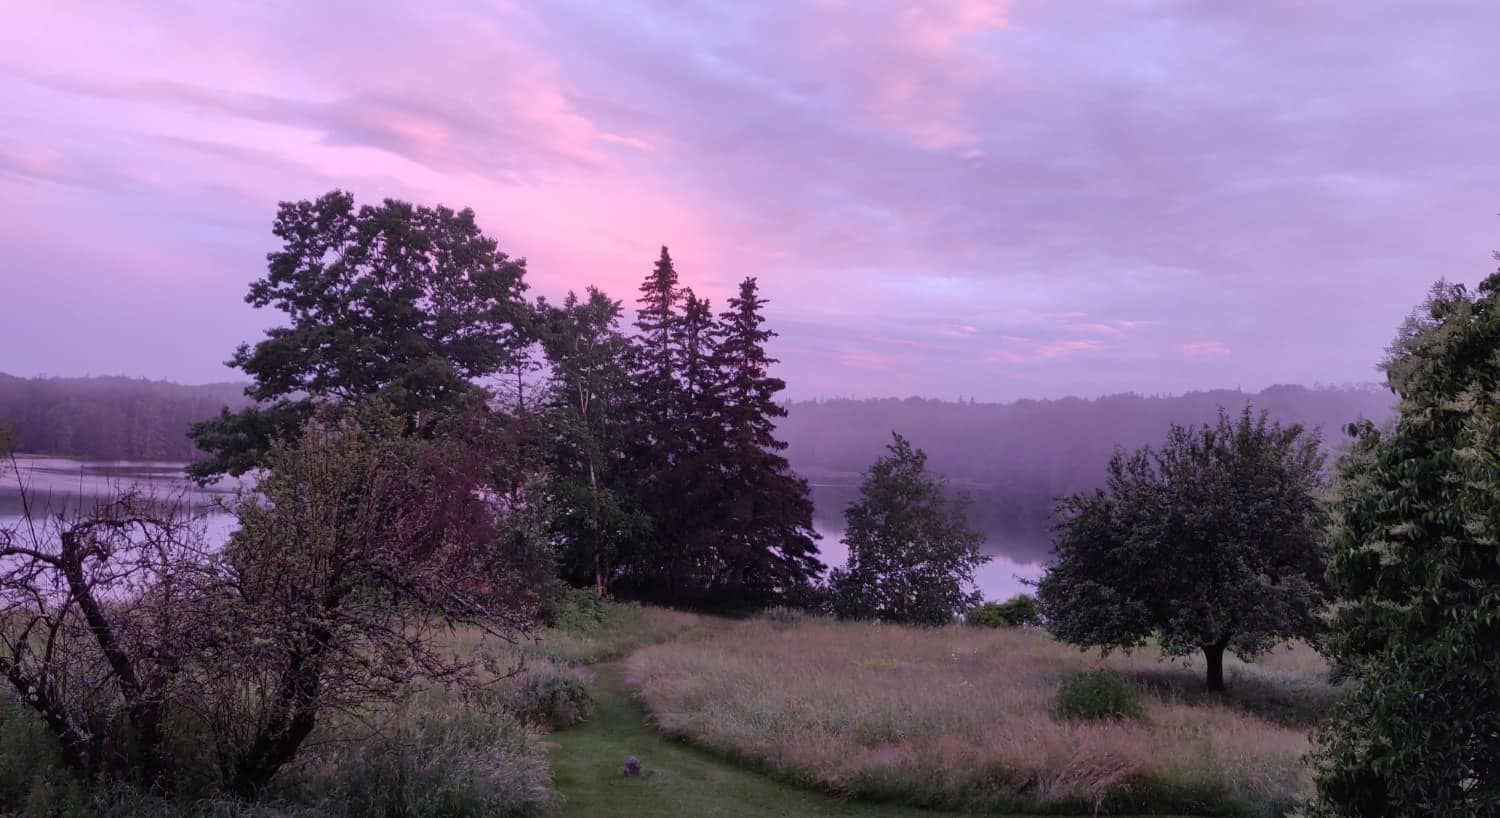 Hill with grass and trees with a body of water surrounded by more trees in the background with the sky full of pink, purple, and blue hues